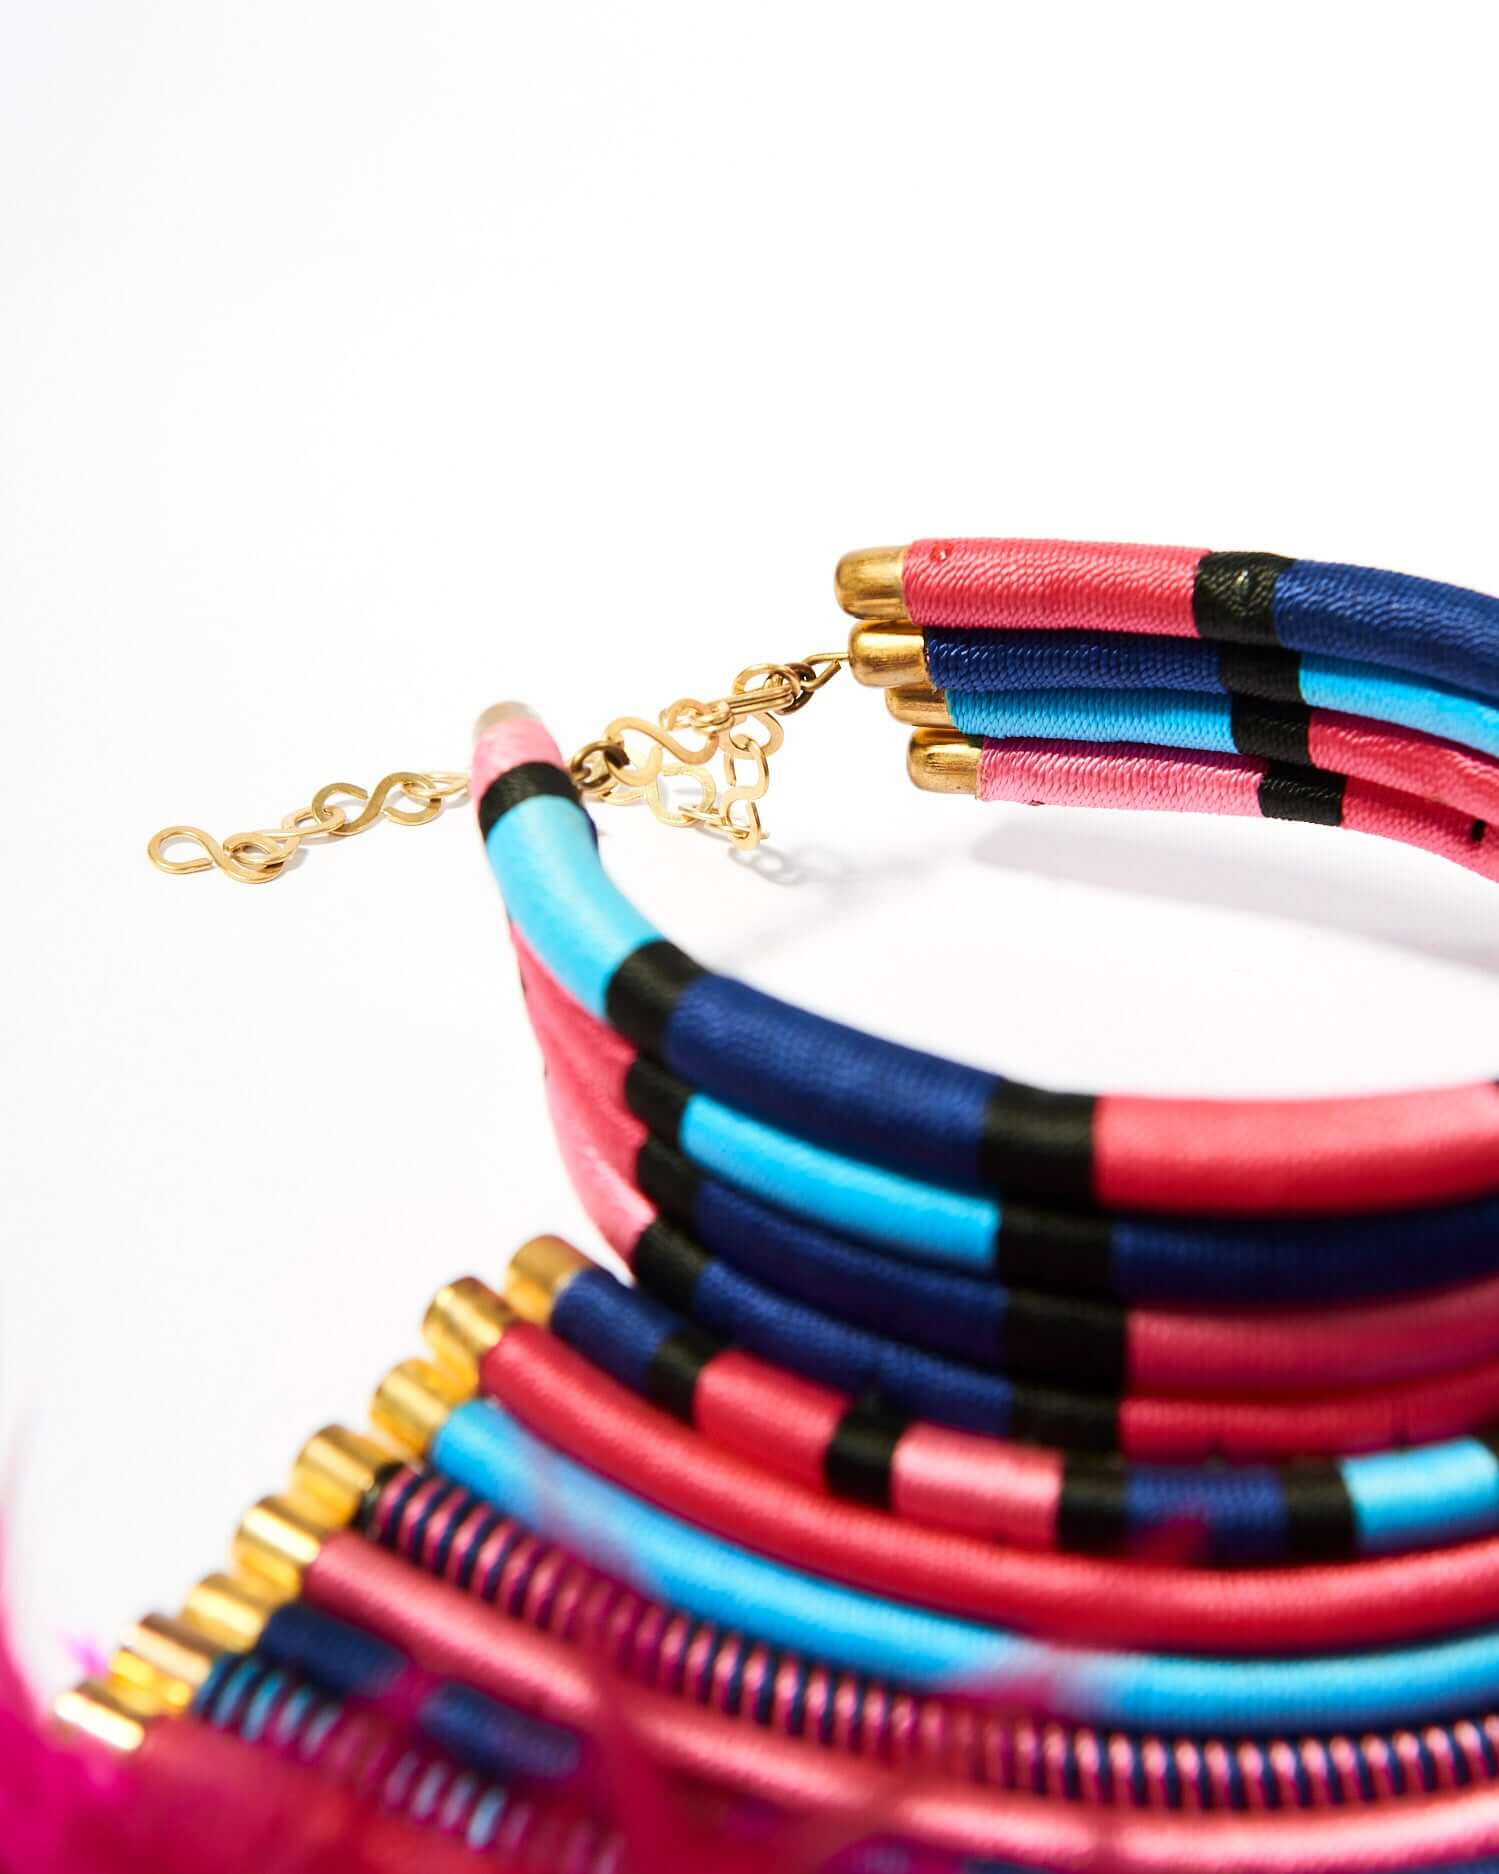 Shop Furaha Neckpiece by Epica Jewellery on Arrai. Discover stylish, affordable clothing, jewelry, handbags and unique handmade pieces from top Kenyan & African fashion brands prioritising sustainability and quality craftsmanship.